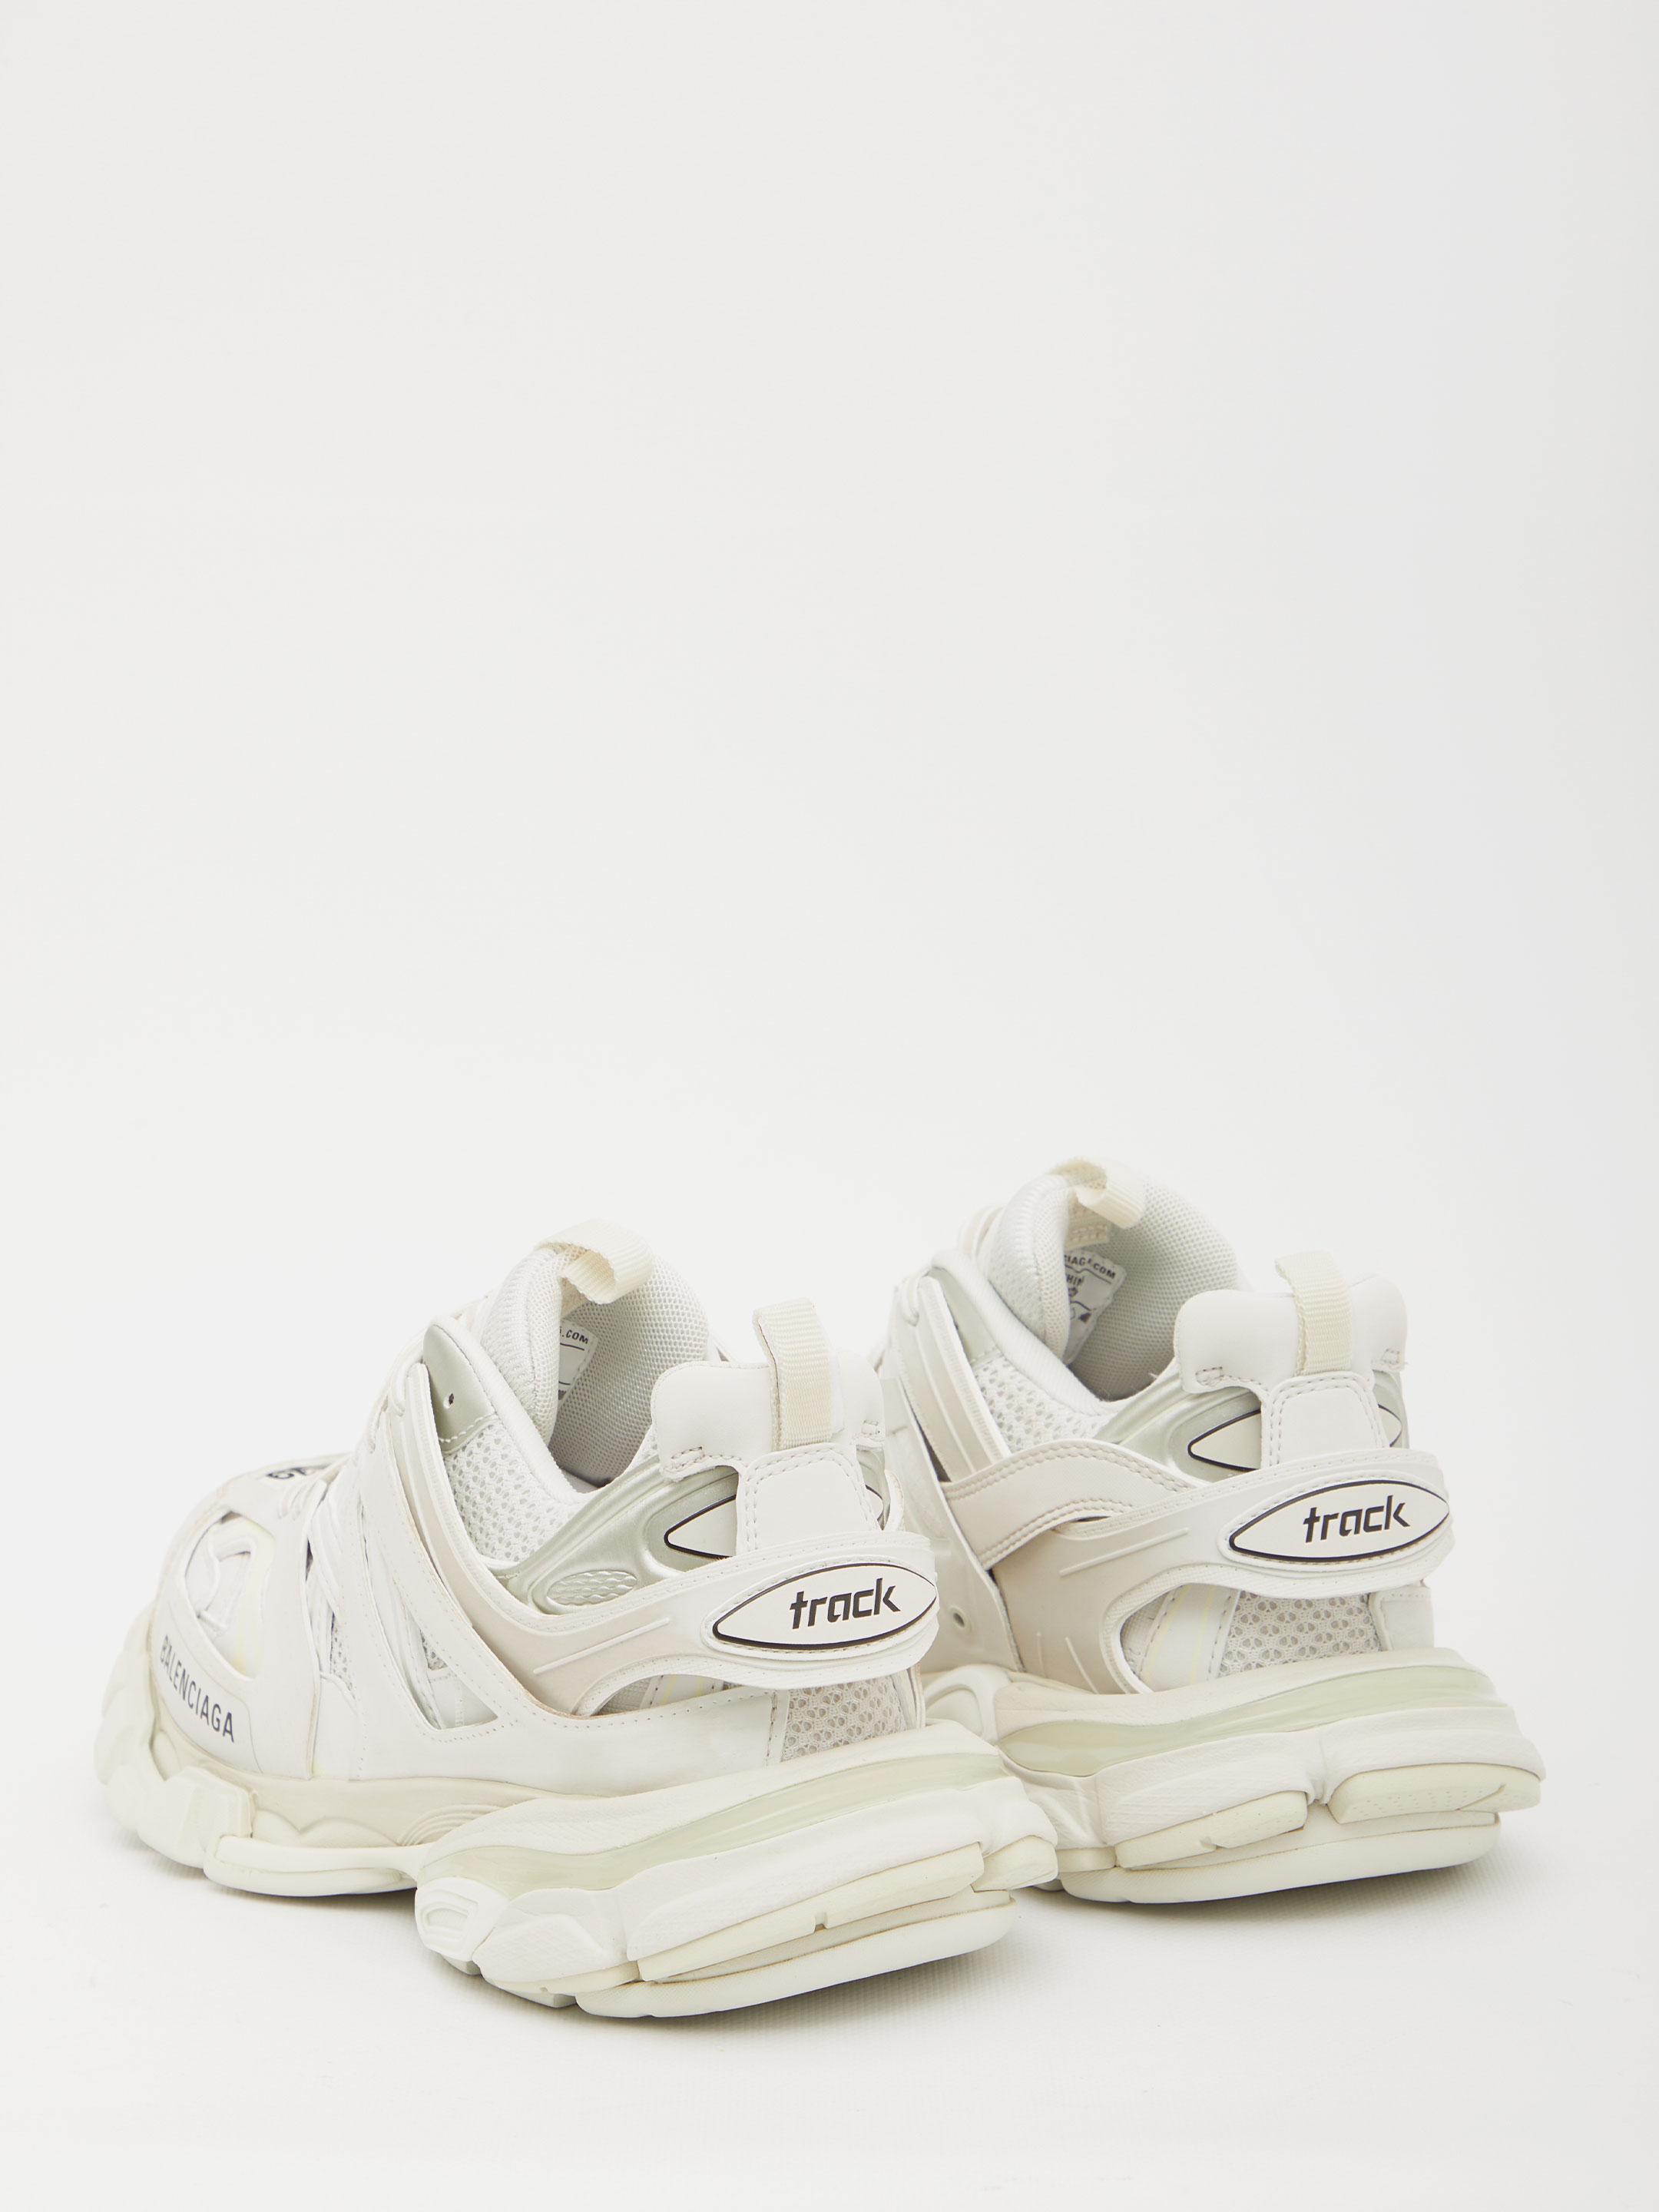 Balenciaga Synthetic Track Sneakers in White | Lyst